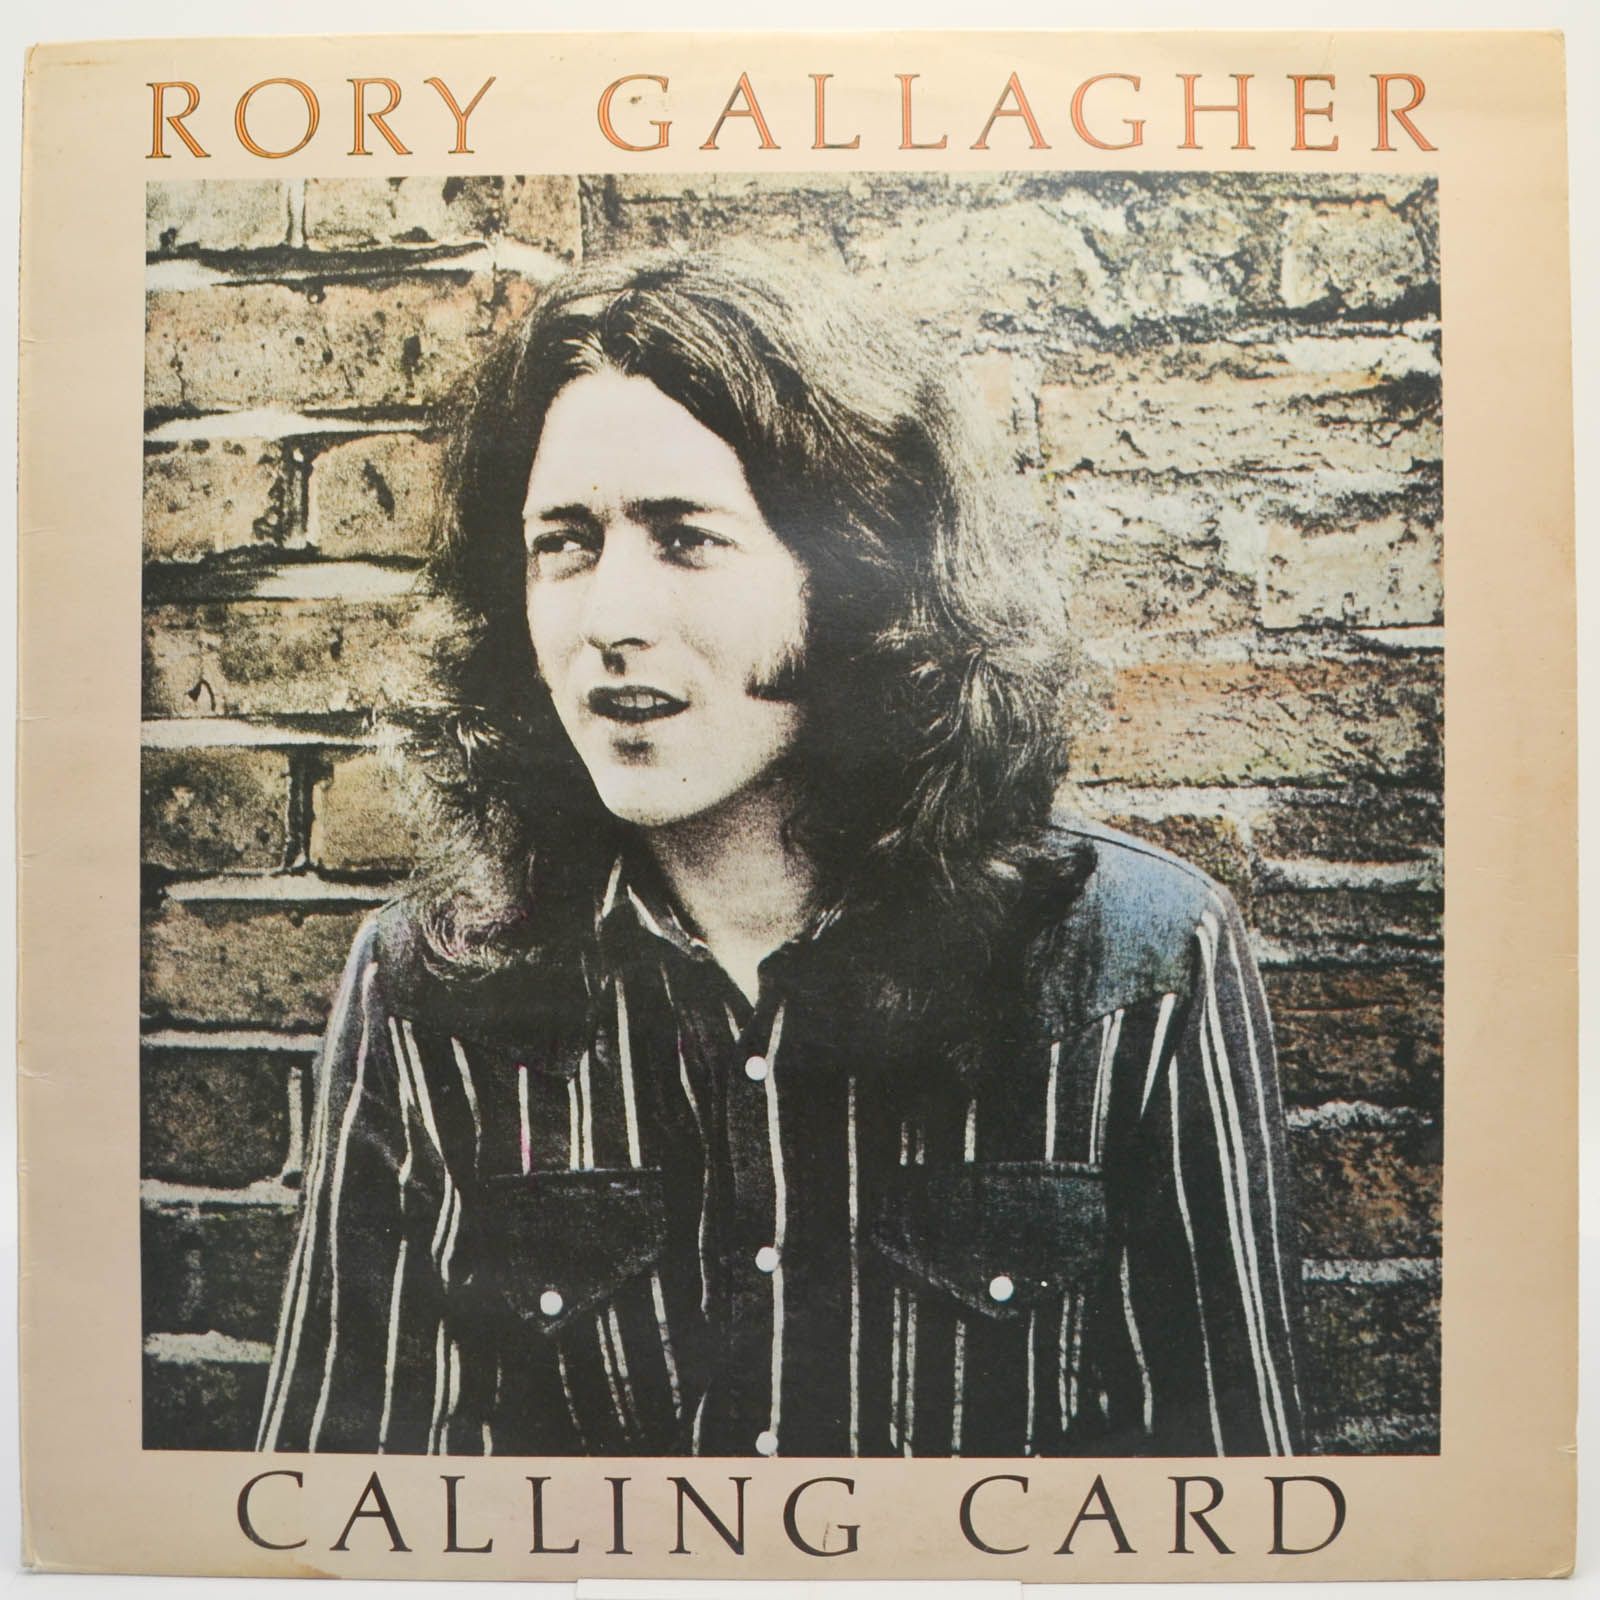 Rory Gallagher — Calling Card (UK), 1976